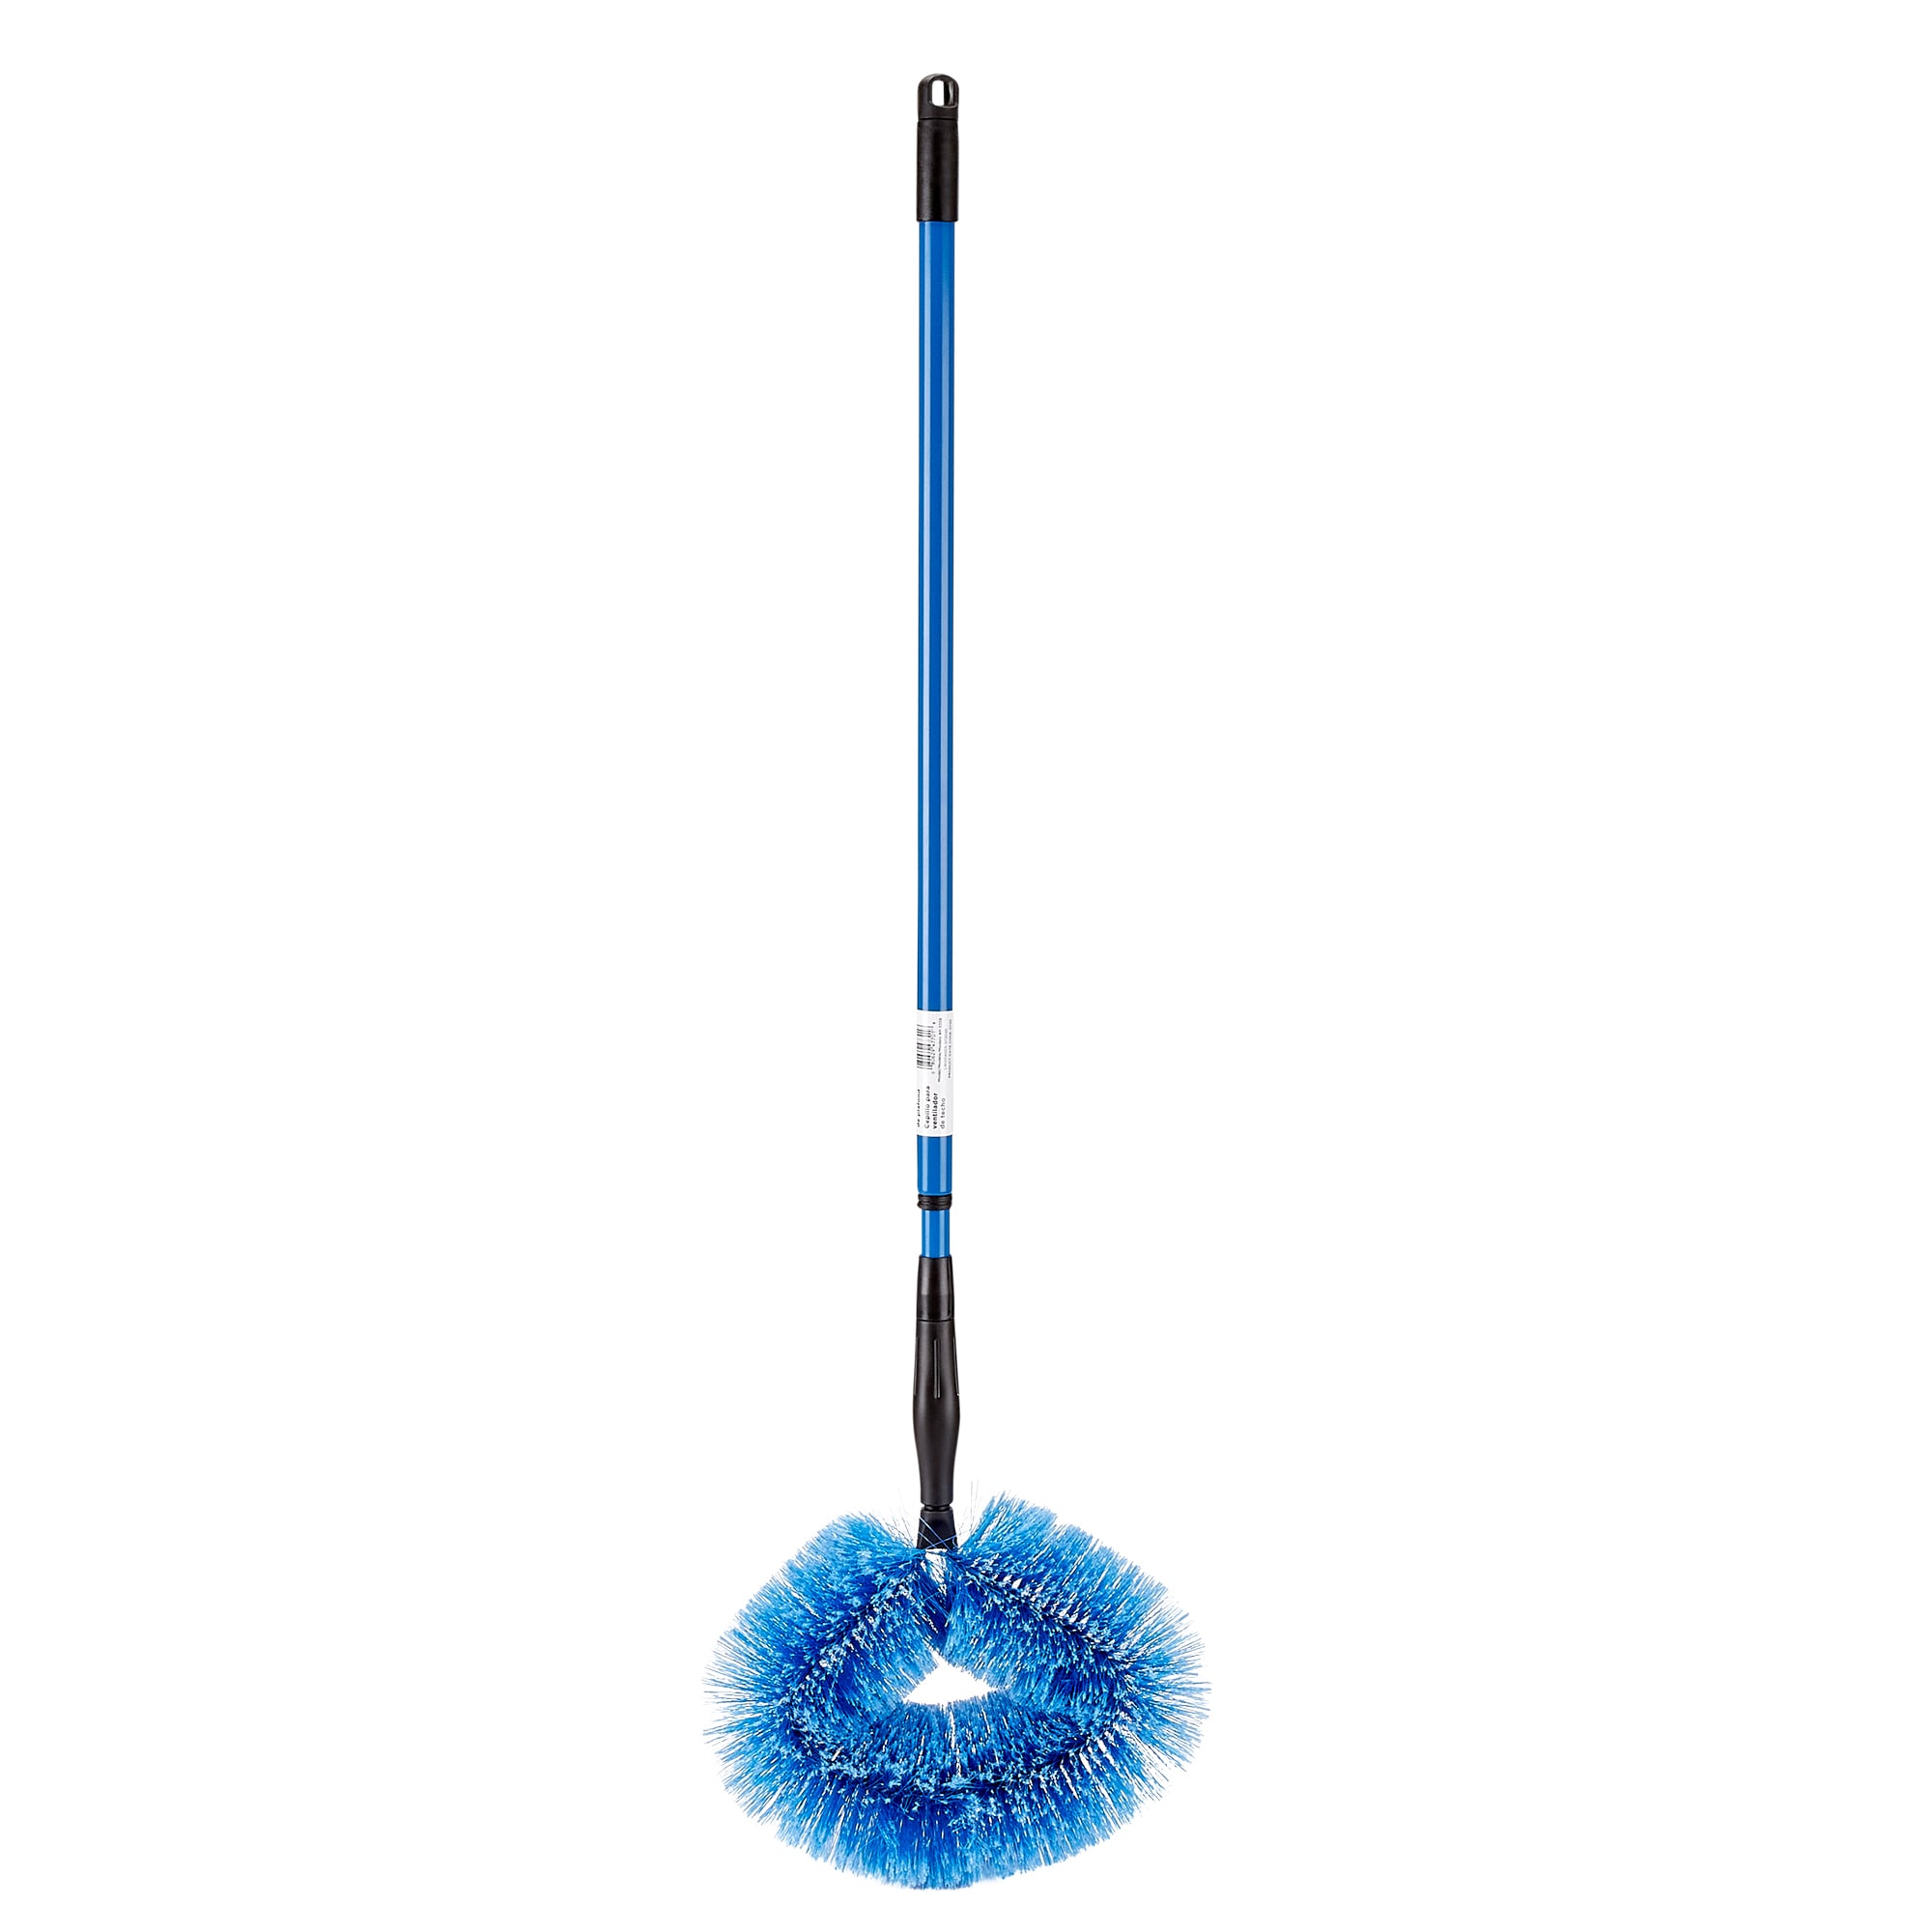 Blade Maid Deluxe Ceiling Fan Cleaner- Dust Cleaning Tool with 6 Foot  Extendable Pole, Cleaning Head, Reusable Fiber Duster, & Flexible Dusting  Brush